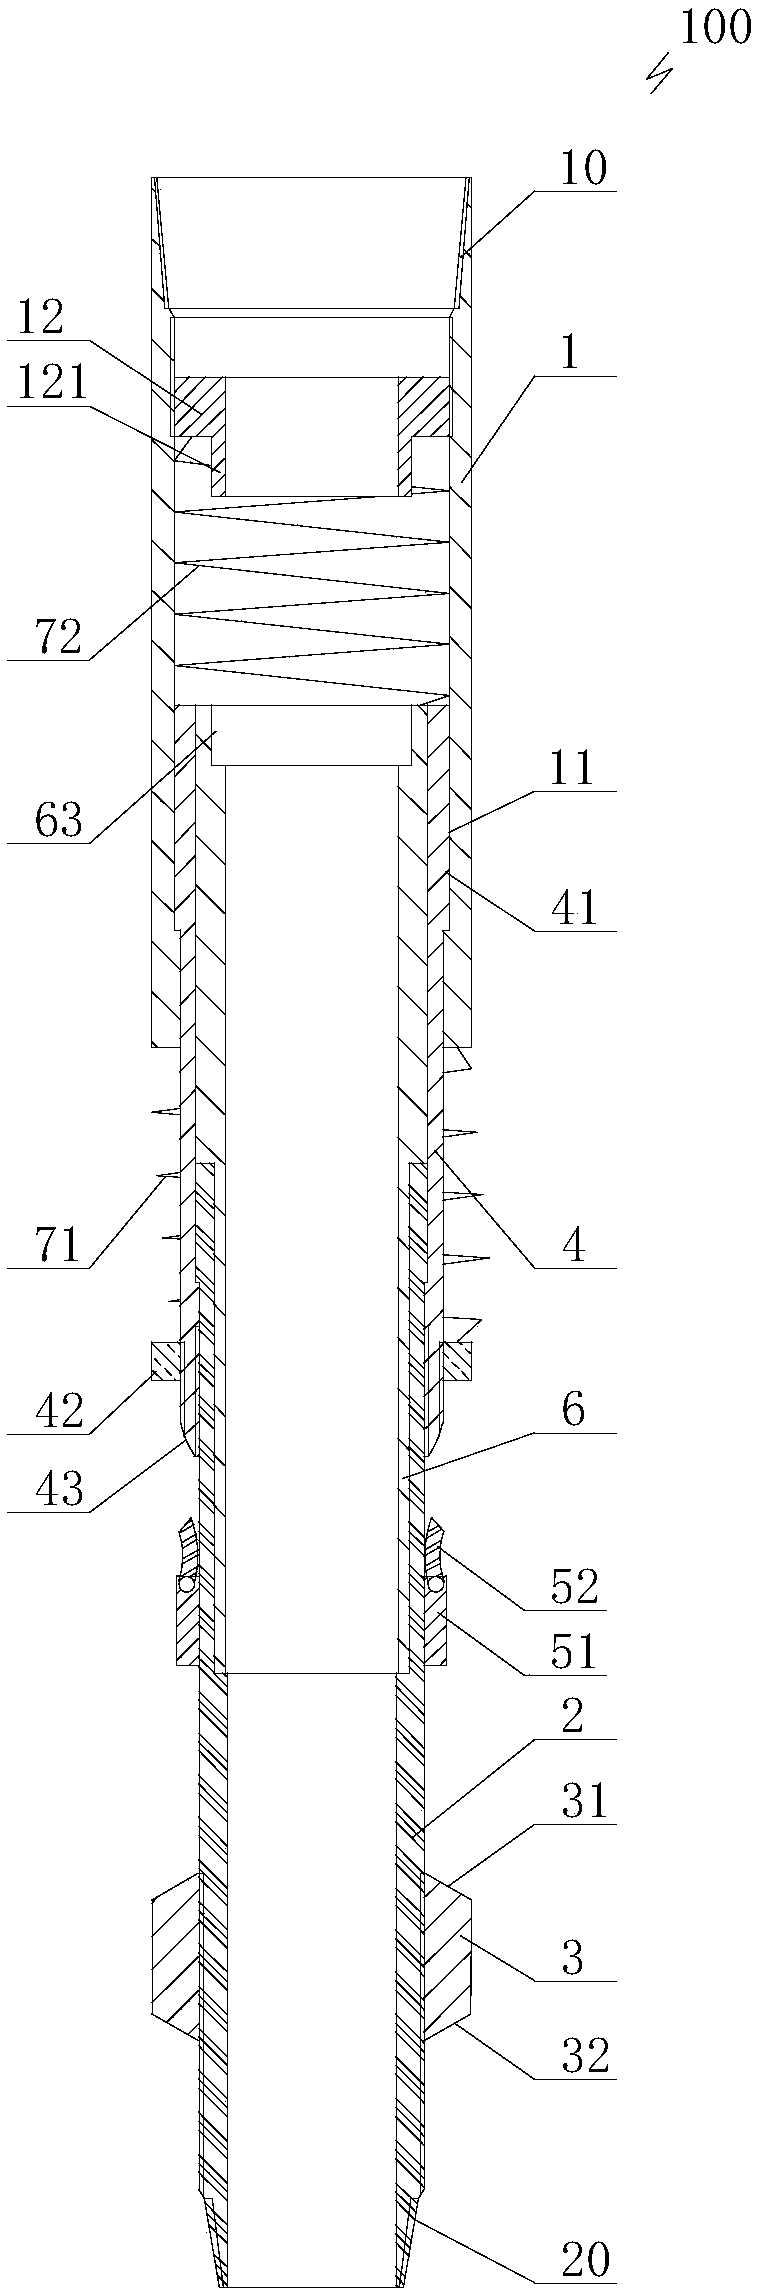 Perforation shock absorber device